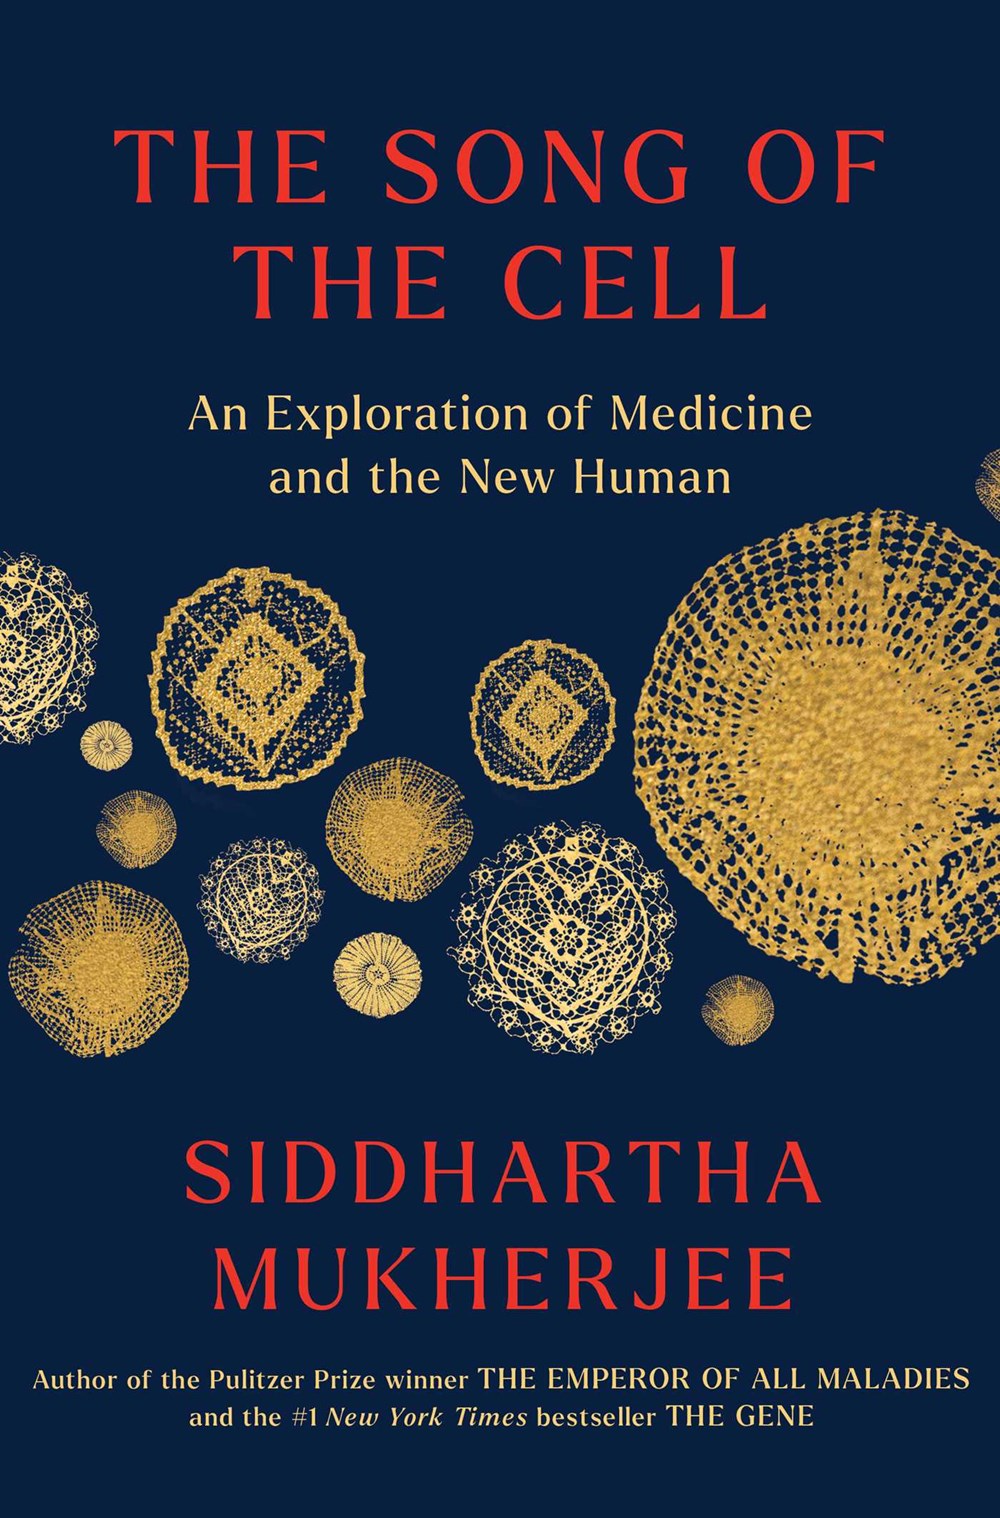 Image of "The Song of he Cell: An Exploration of Medicine and the New Human"